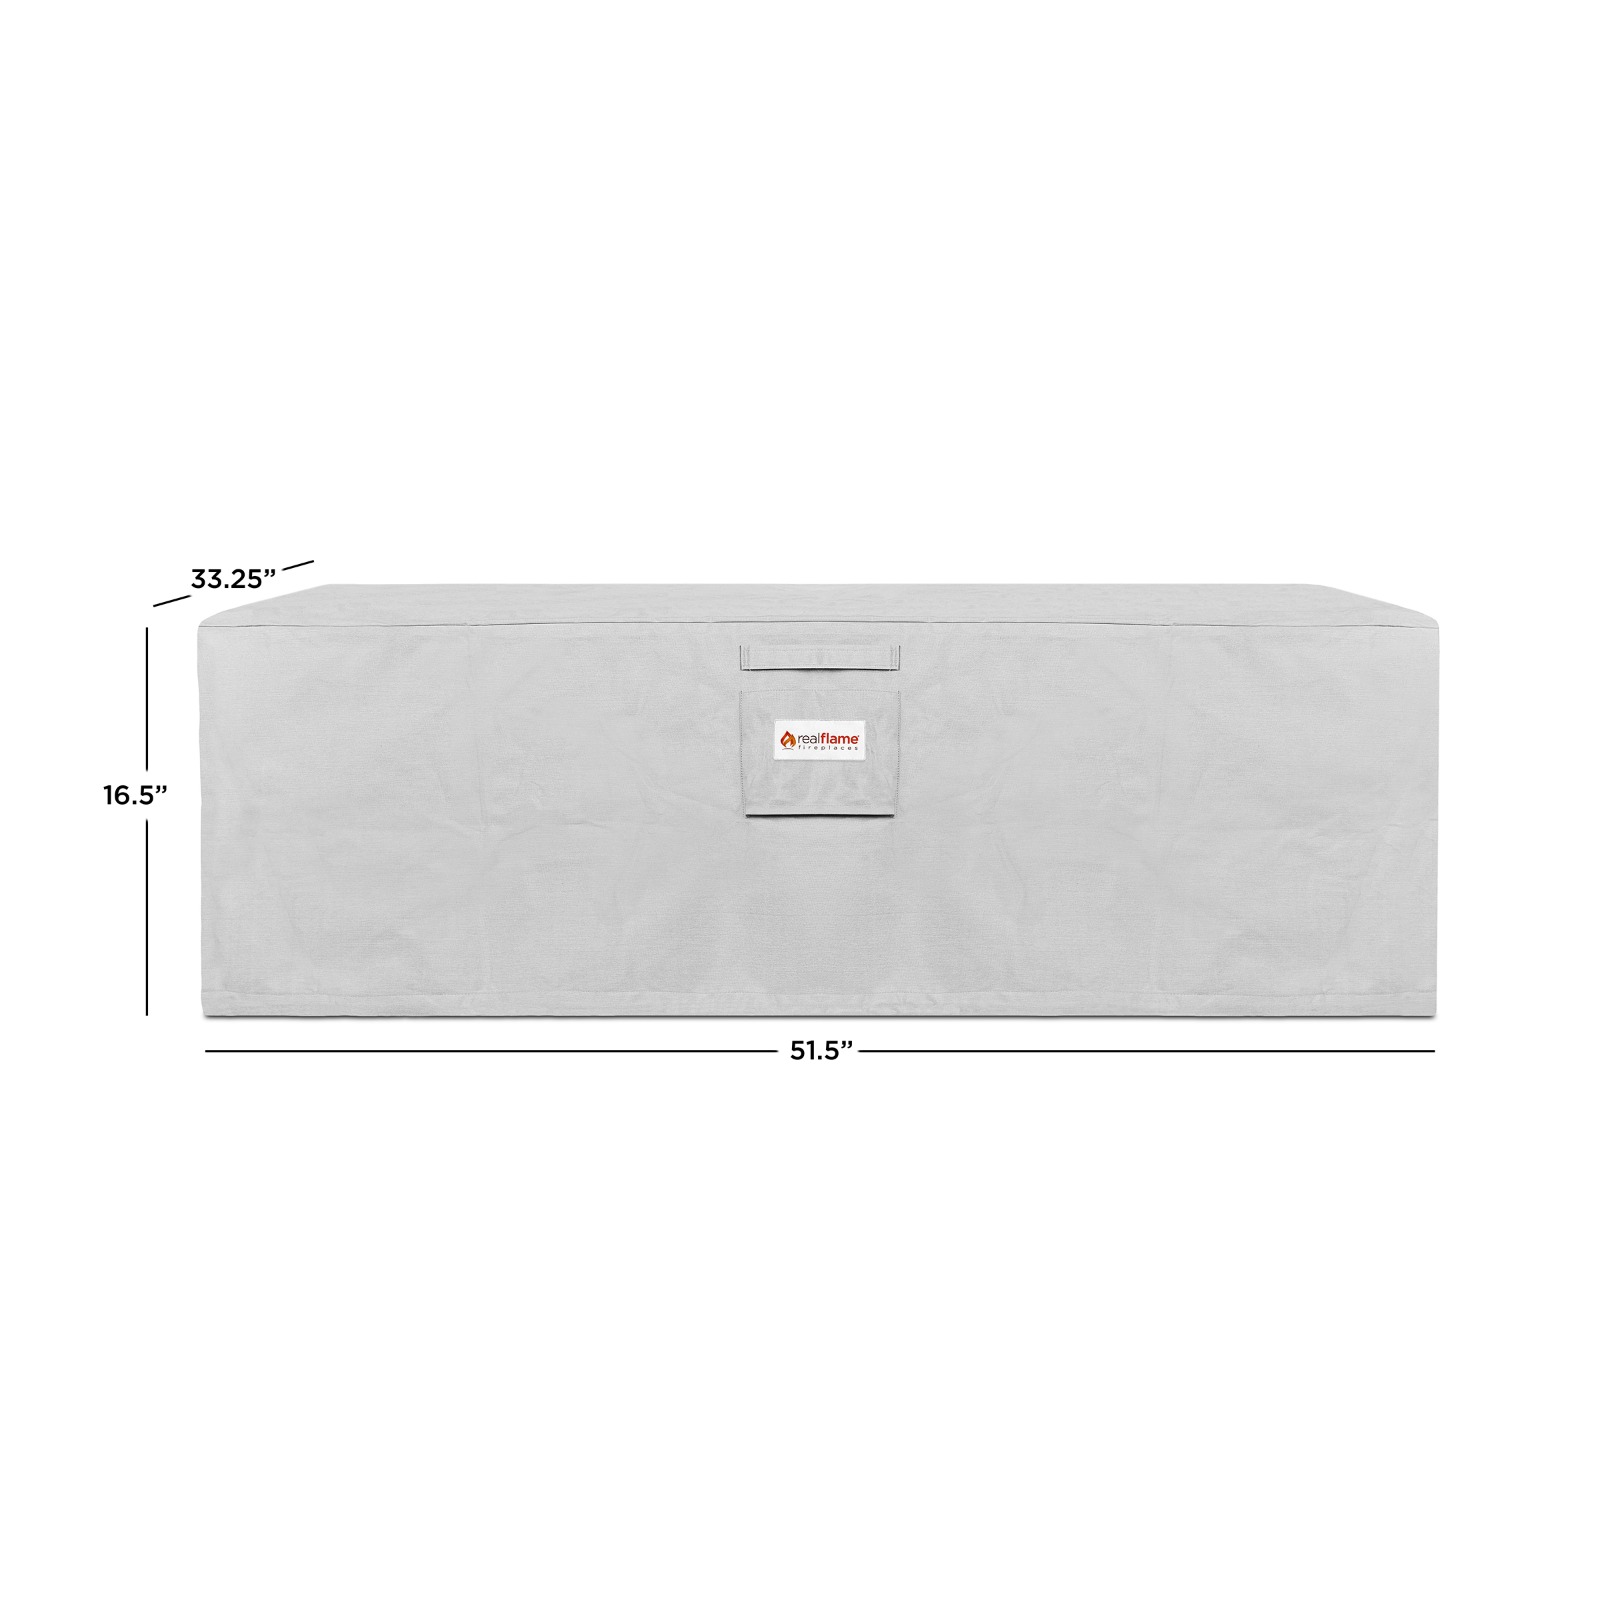 Baltic Rectangle Fire Table Protective Fabric Cover with Drawstring dimensions.